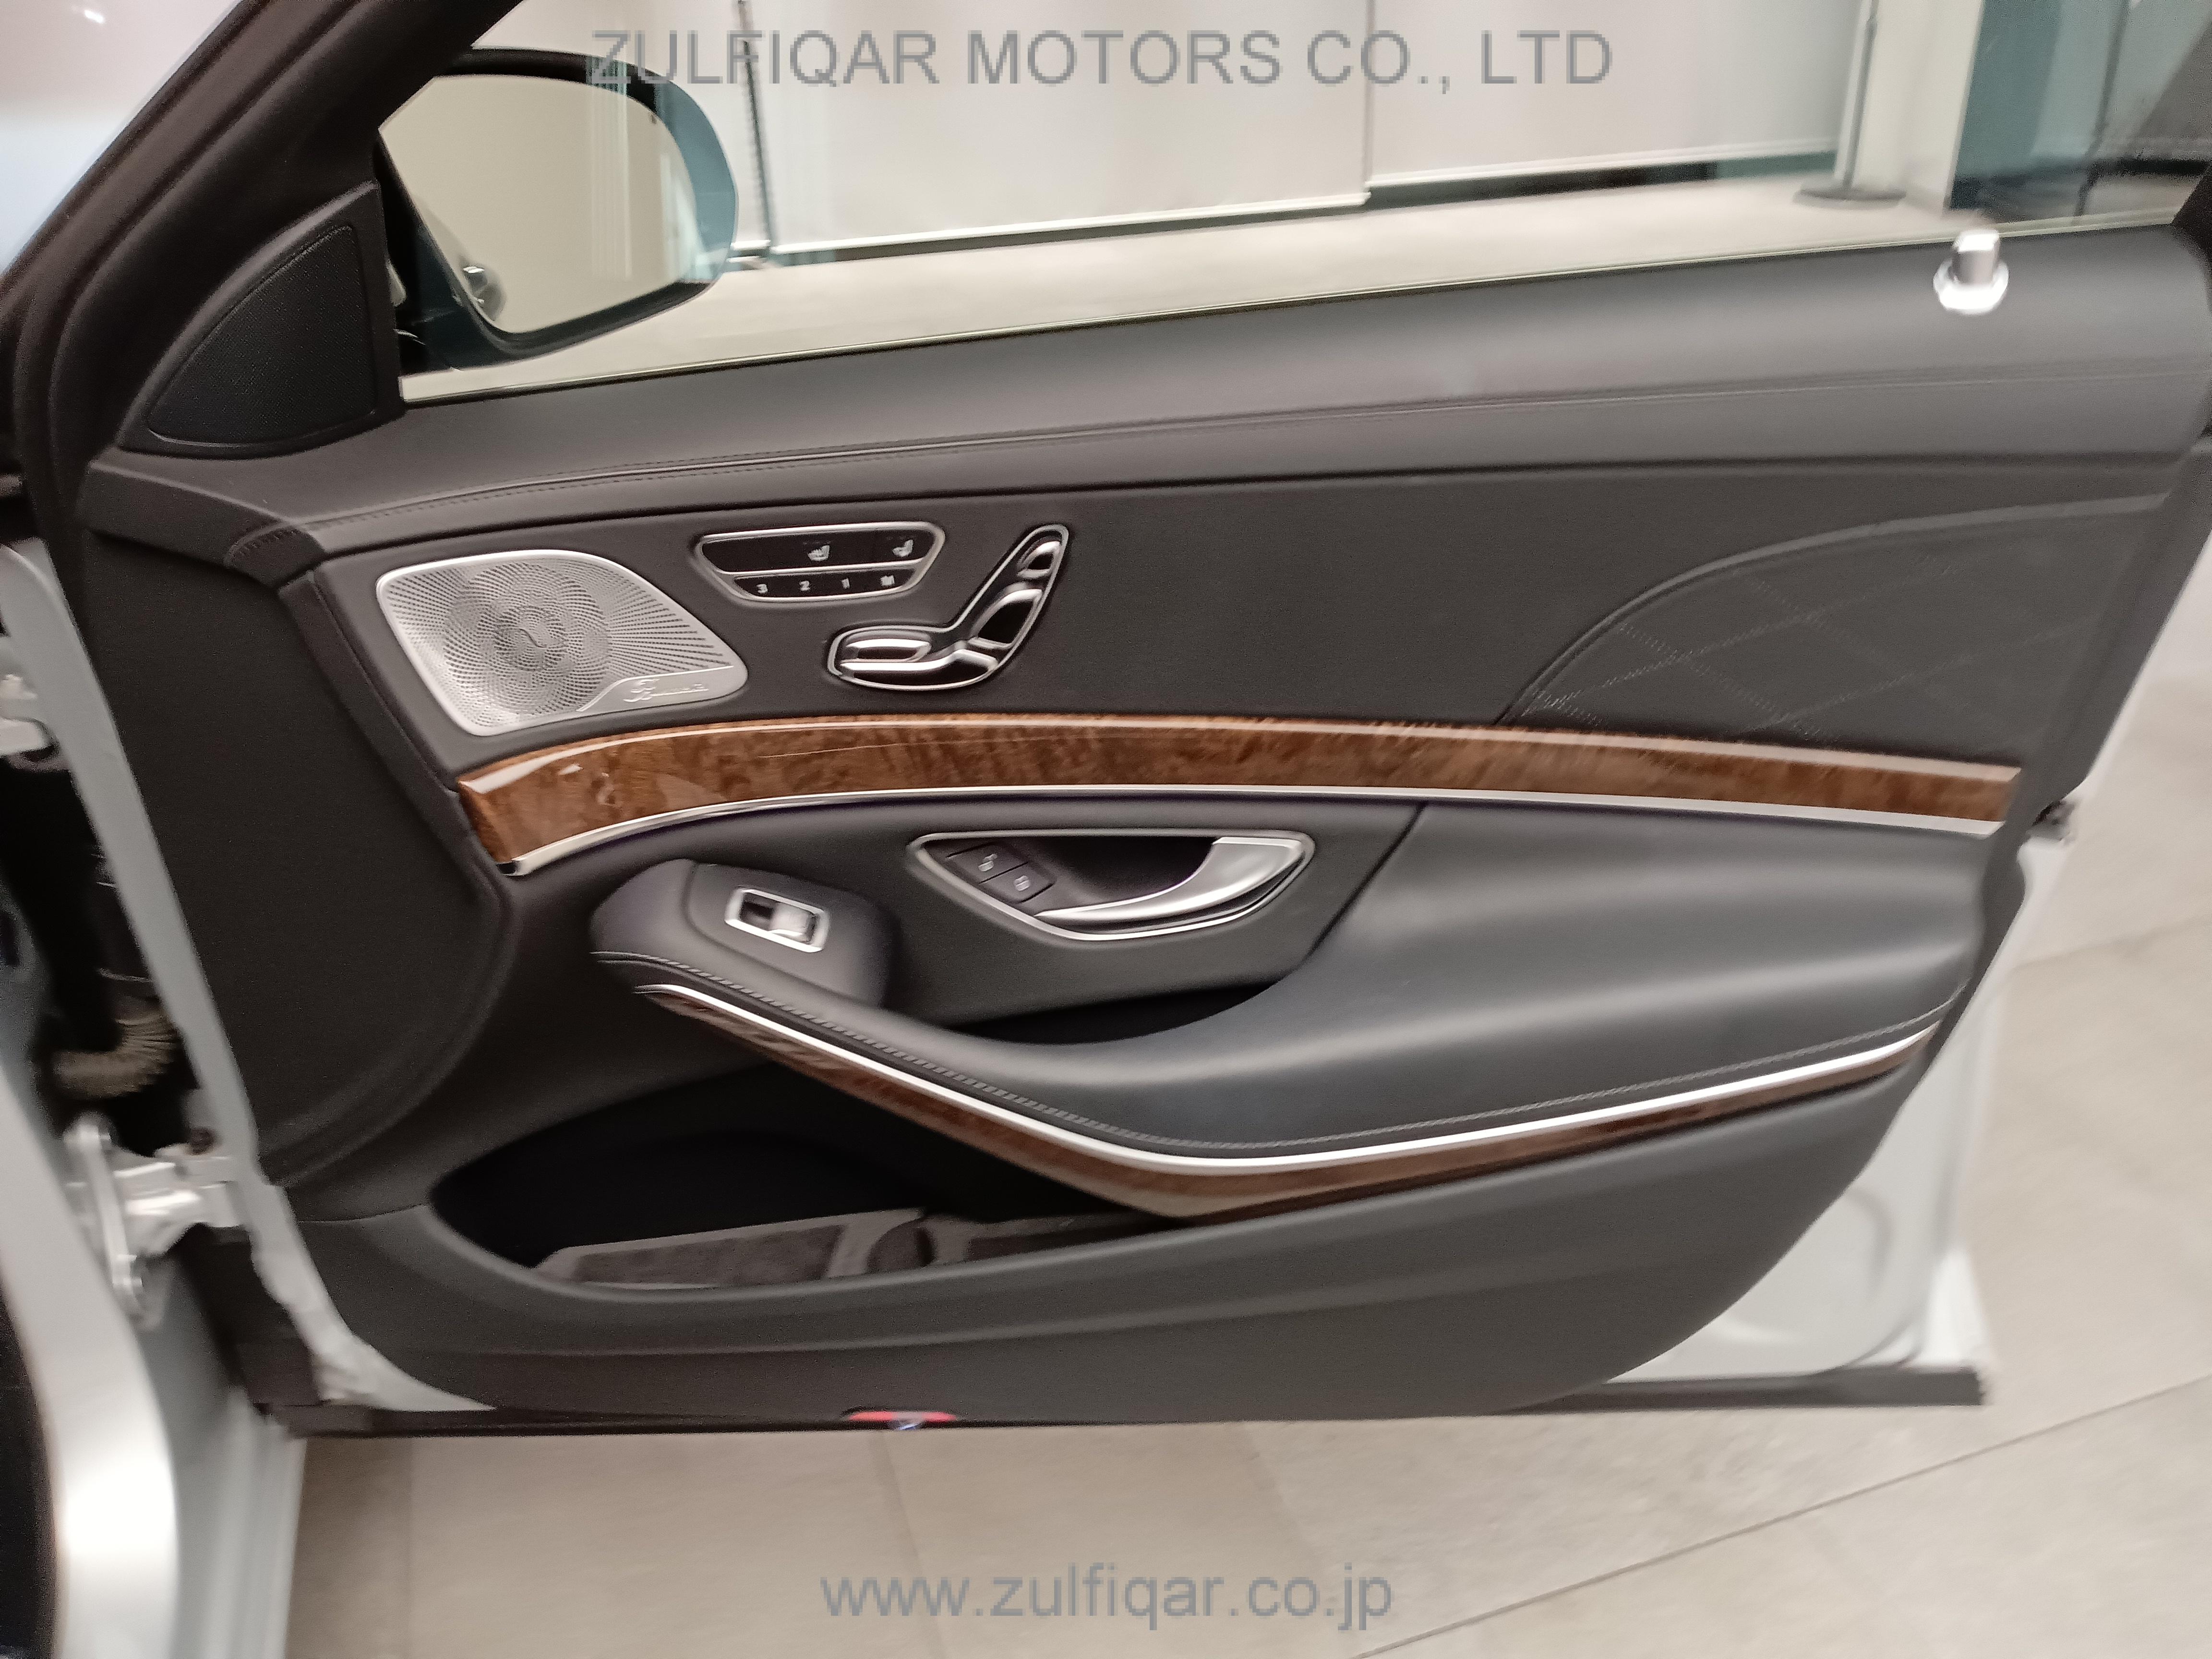 MERCEDES MAYBACH S CLASS 2016 Image 22